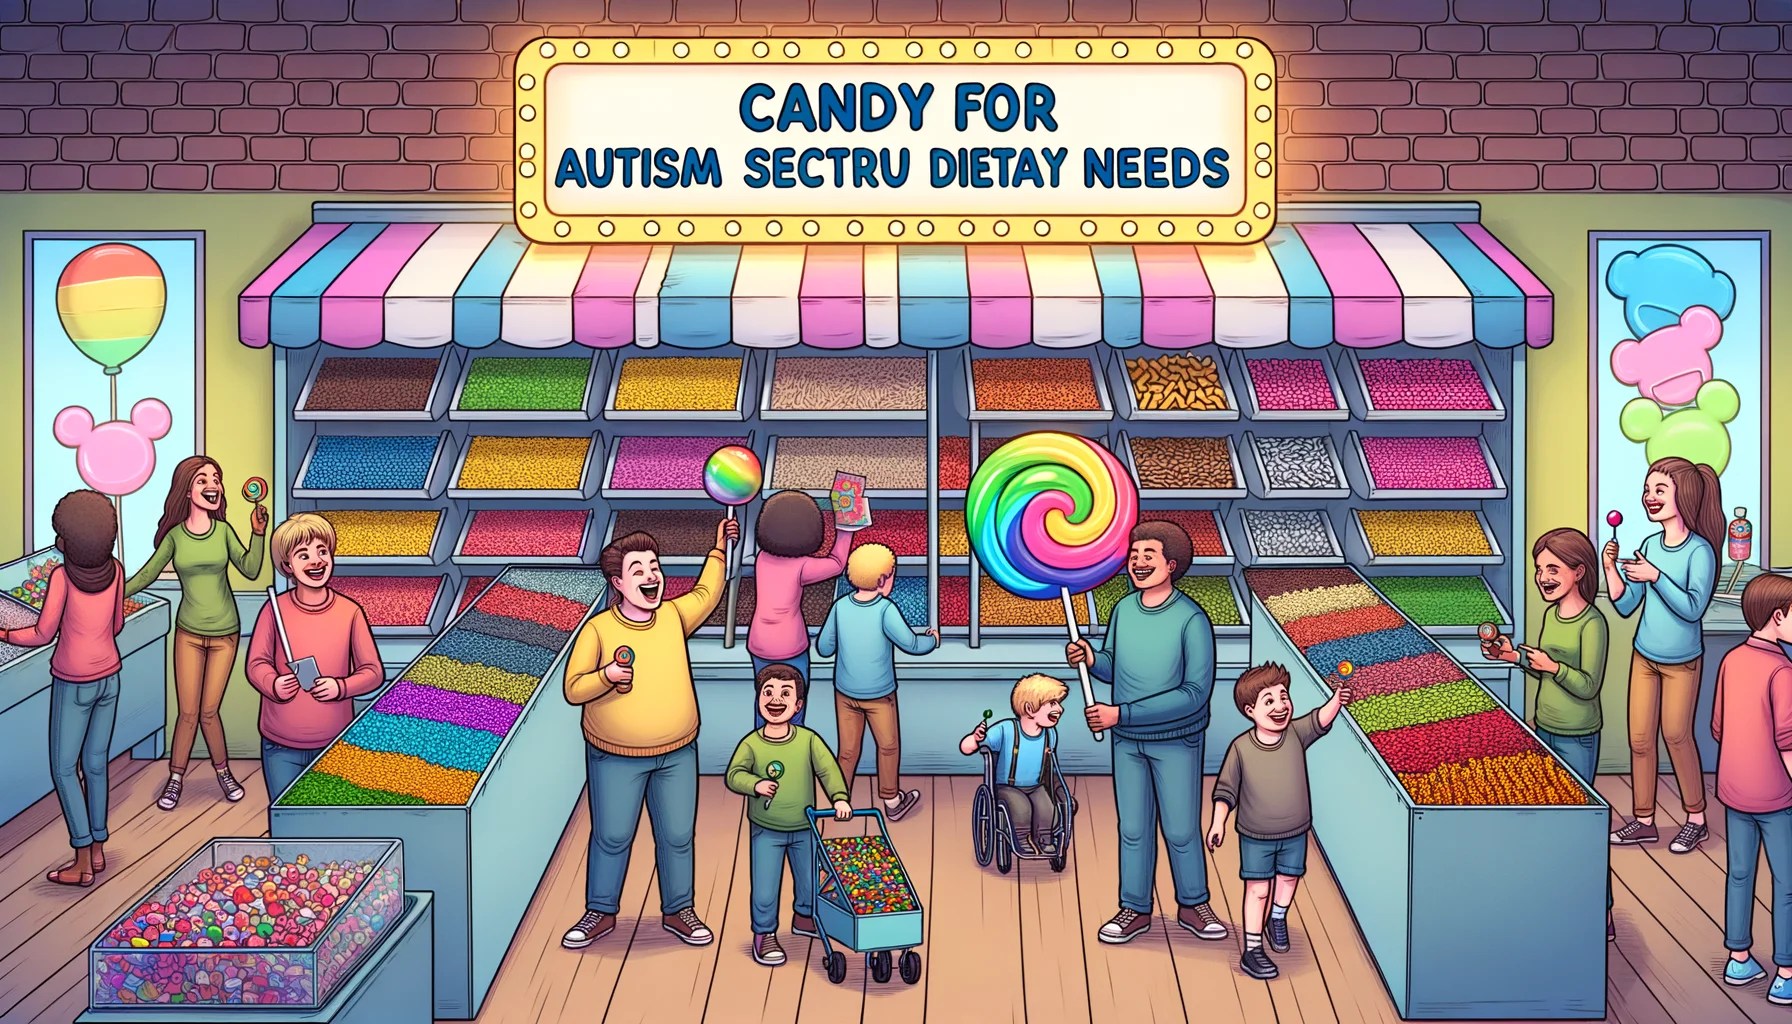 Imagine a humorous yet realistic scene displaying the perfect scenario for 'Candy for Autism Spectrum Dietary Needs'. Picture a brightly coloured candy store filled with various different types of candy, all labelled clearly to cater to different dietary needs. There are happy children and adults alike, finding joy in this inclusive environment. There are some who are doing funny, unexpected things like comparing the size of a giant lollipop to their own height or trying to stack gummy bears into a tower. All of this takes place under a neon sign that proudly beams the text, 'Candy for Autism Spectrum Dietary Needs'.